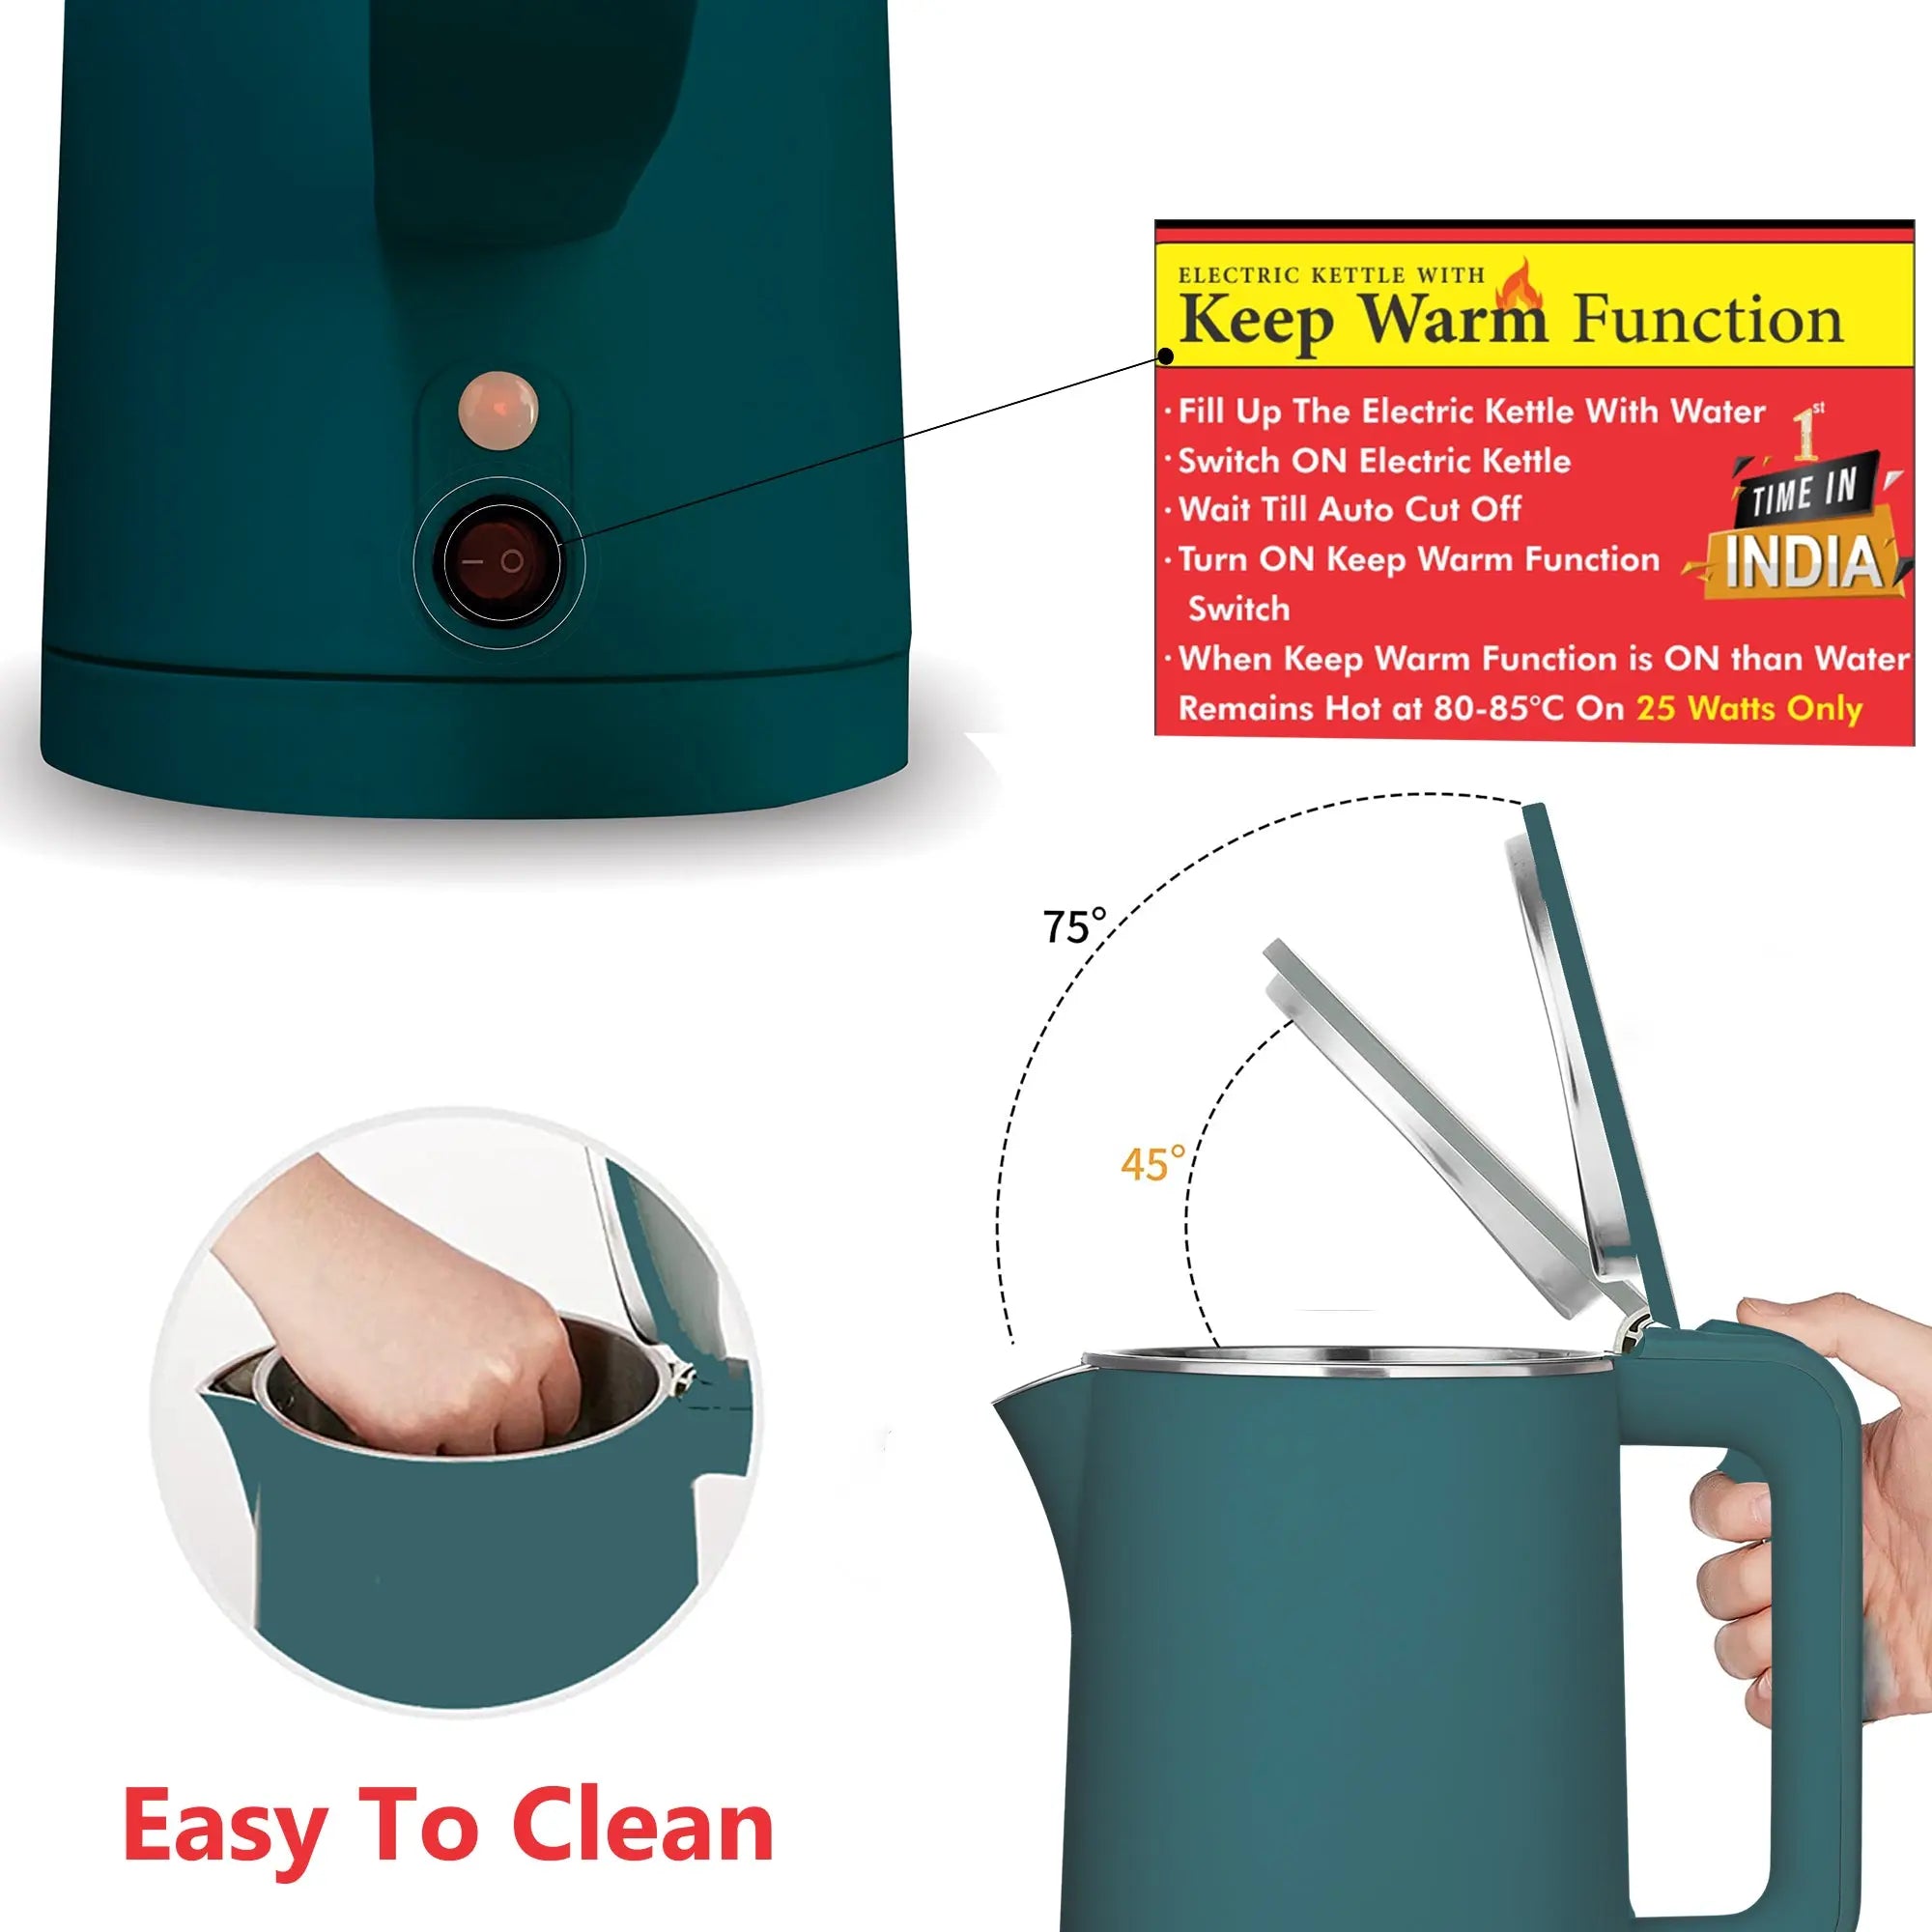 Warmex Electric Kettle KW80 with Keep Warm Function warmexhomeappliances2